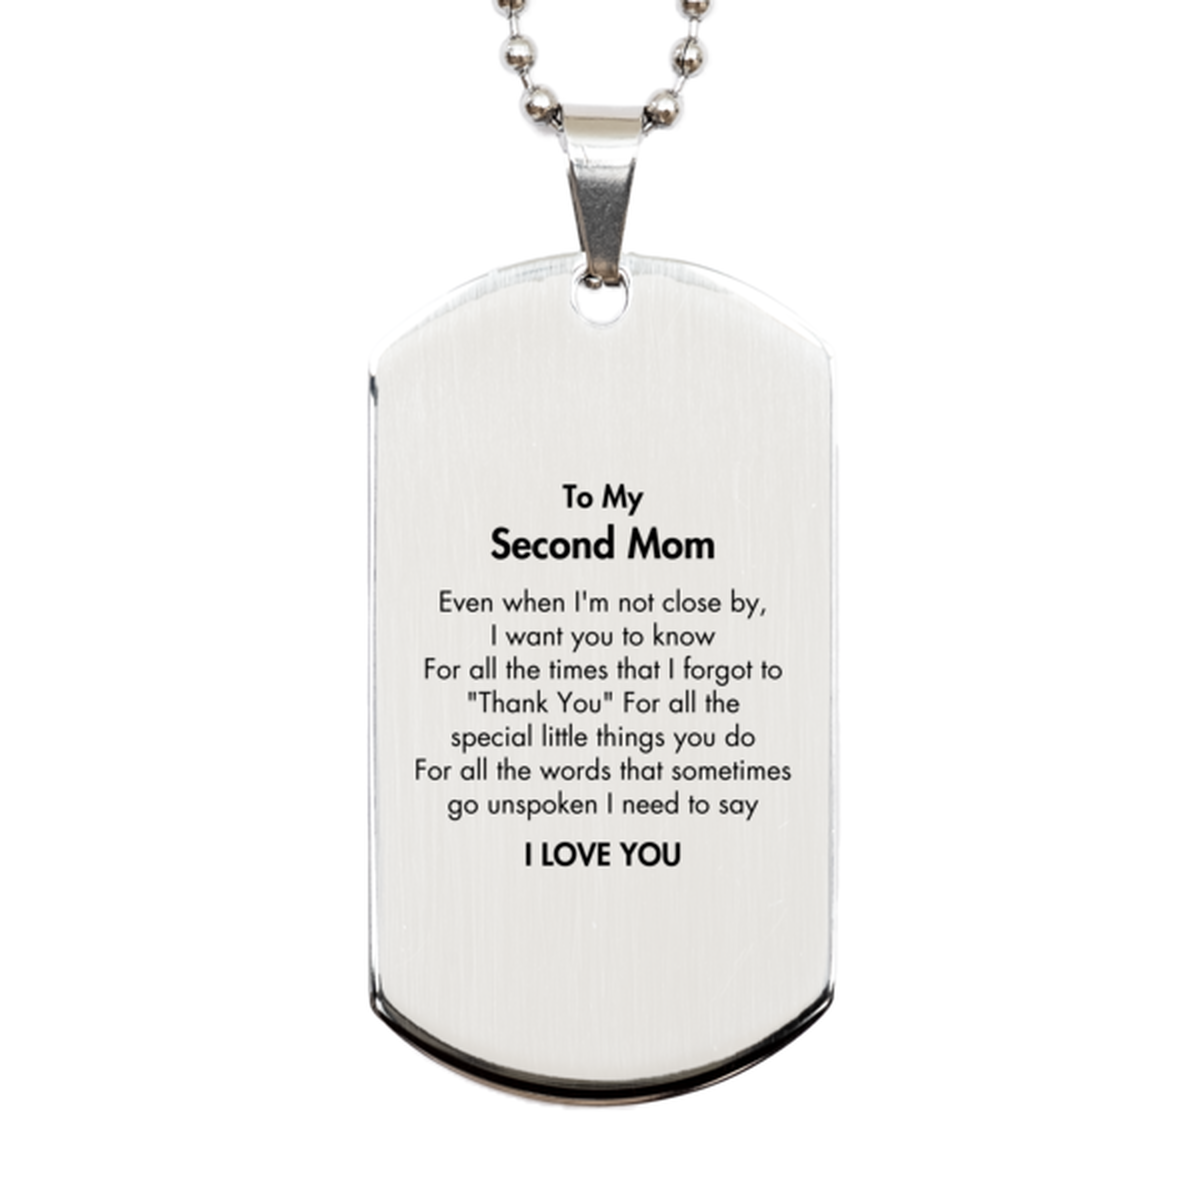 Thank You Gifts for Second Mom, Keepsake Silver Dog Tag Gifts for Second Mom Birthday Mother's day Father's Day Second Mom For all the words That sometimes go unspoken I need to say I LOVE YOU